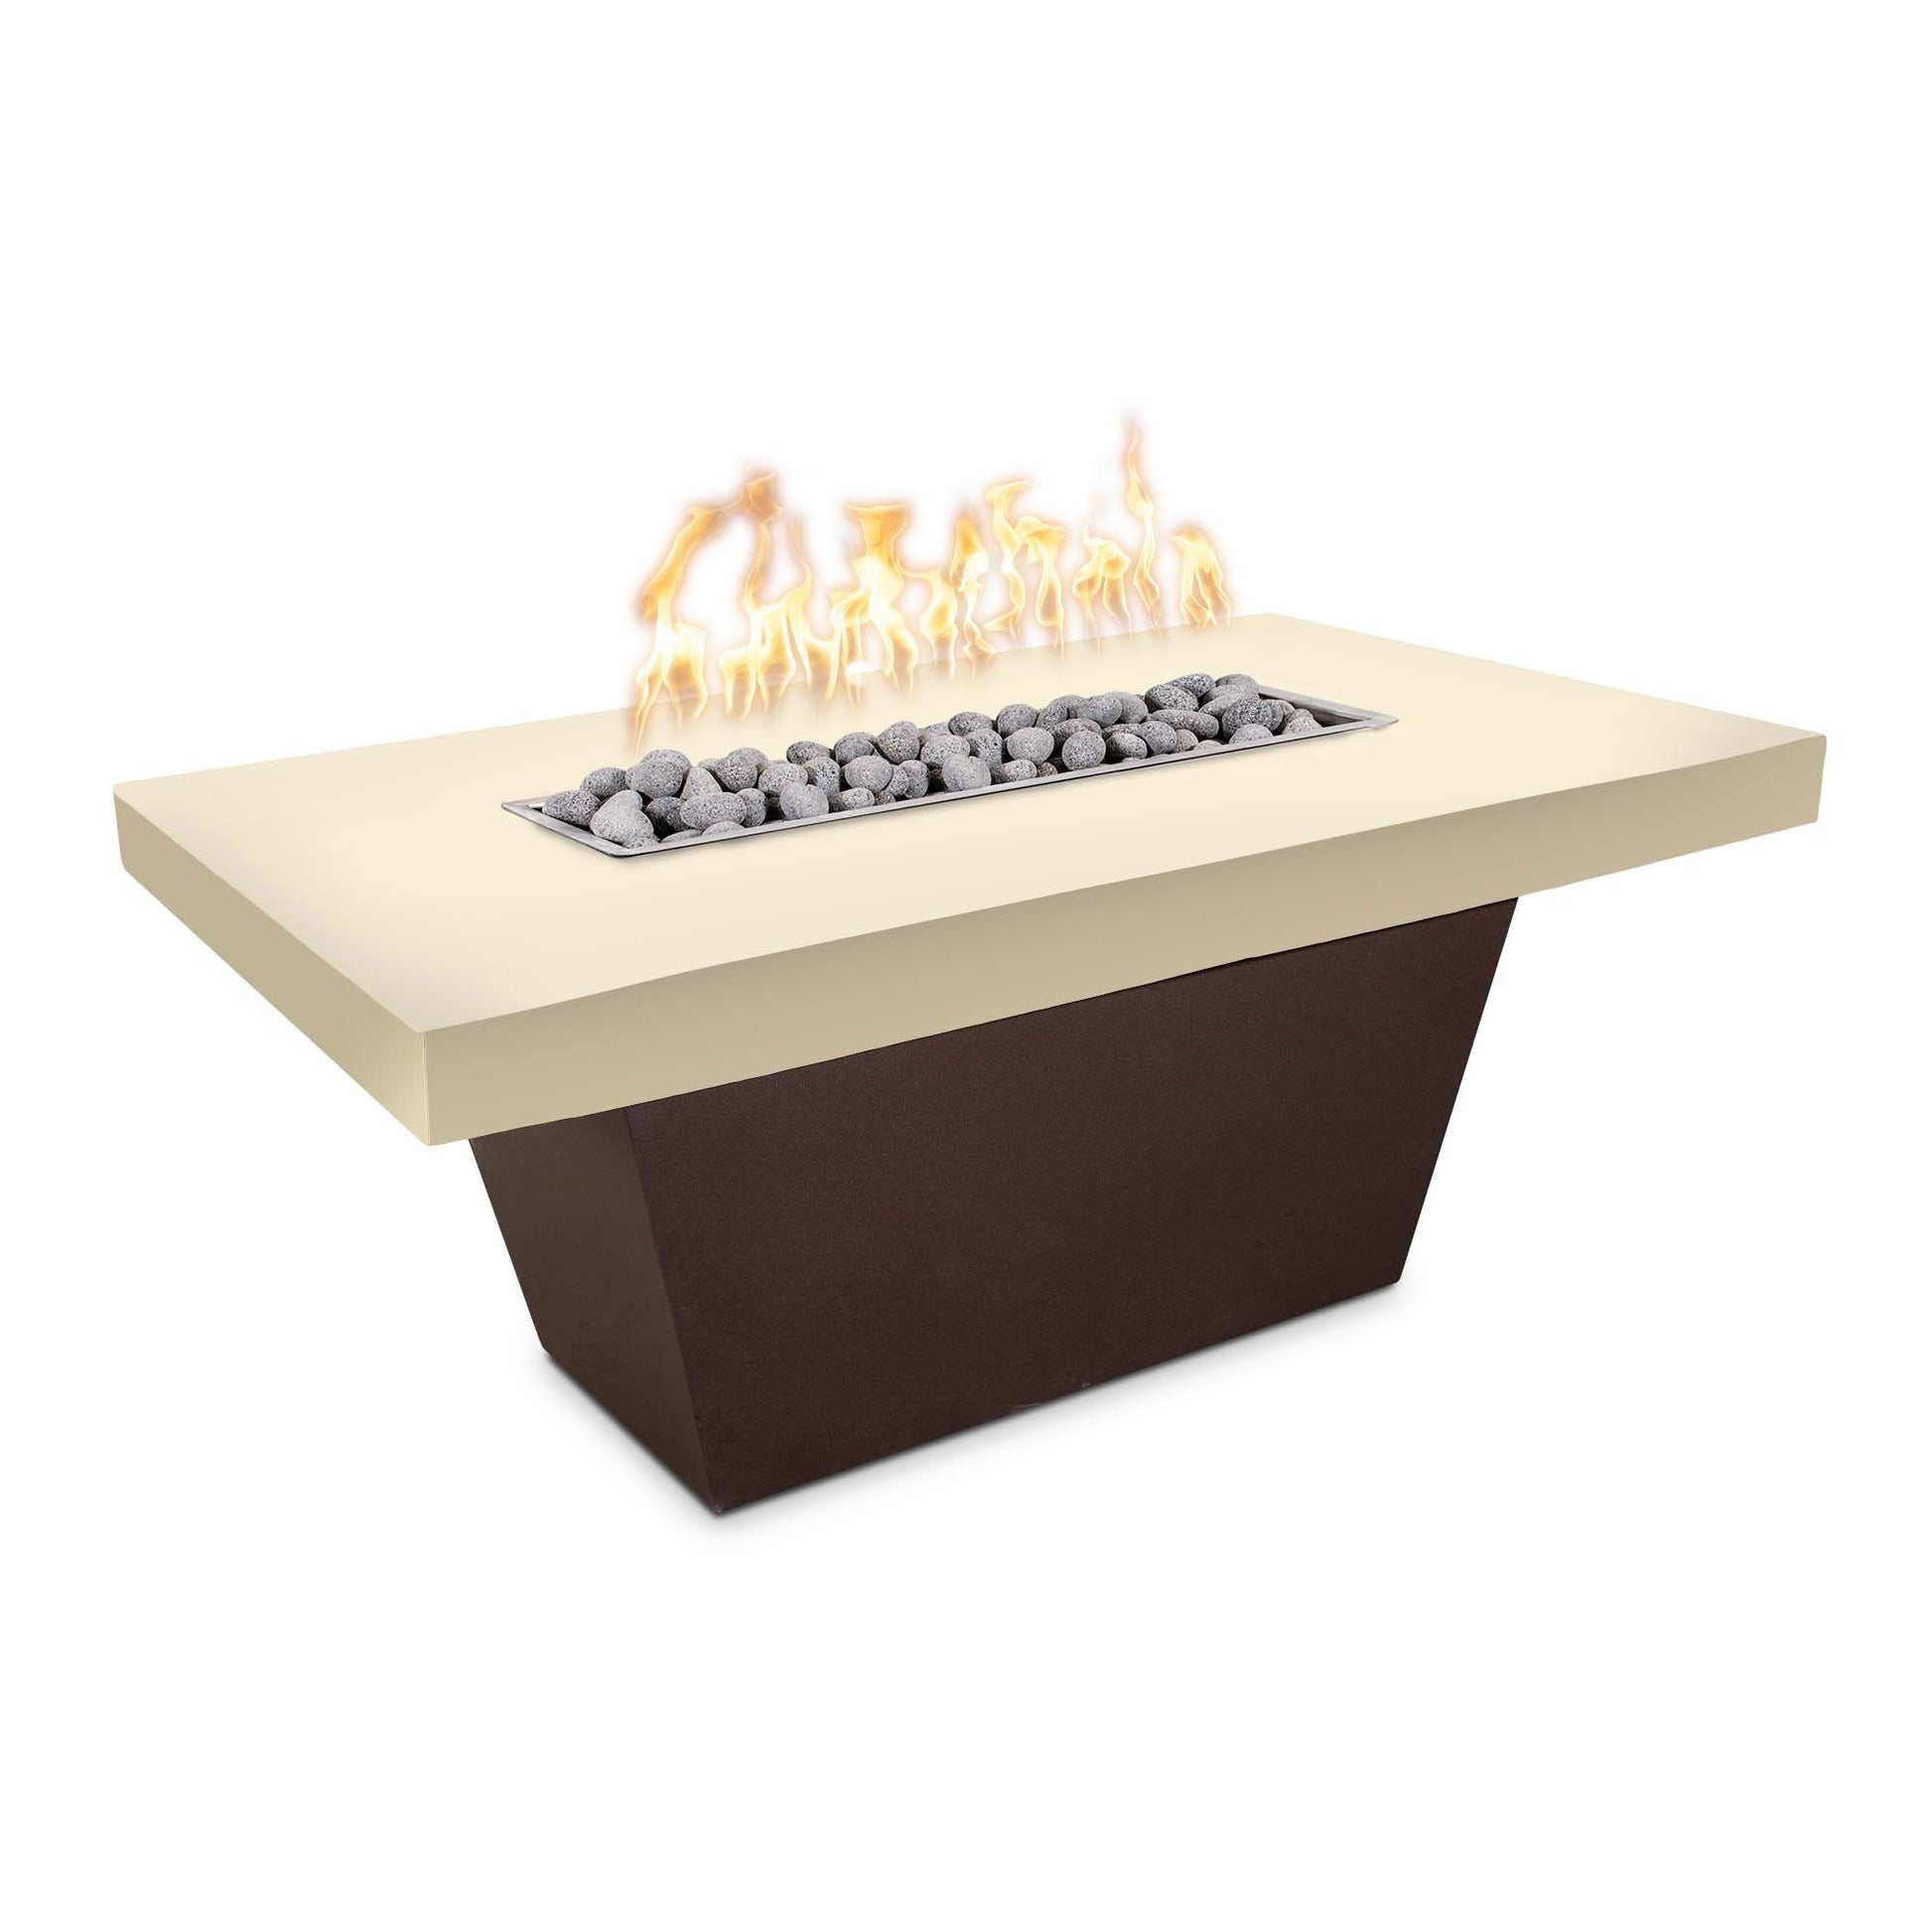 The Outdoor Plus Tacoma 48" Rustic White Concrete Top & Silver Vein Powder Coated Base Liquid Propane Fire Table with Match Lit Ignition